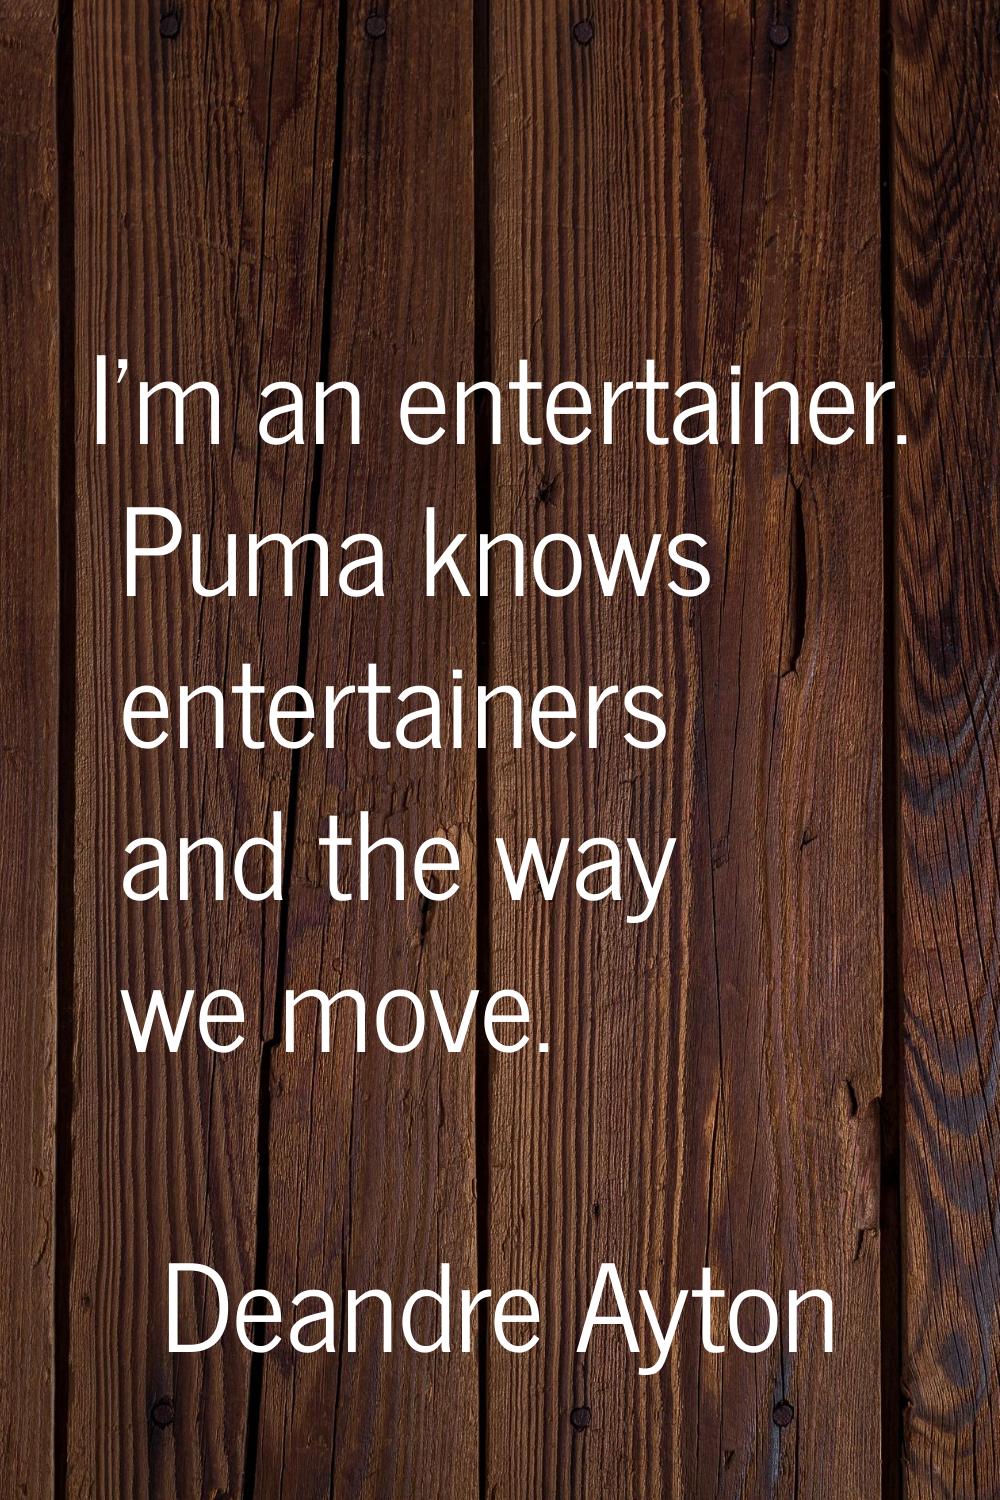 I'm an entertainer. Puma knows entertainers and the way we move.